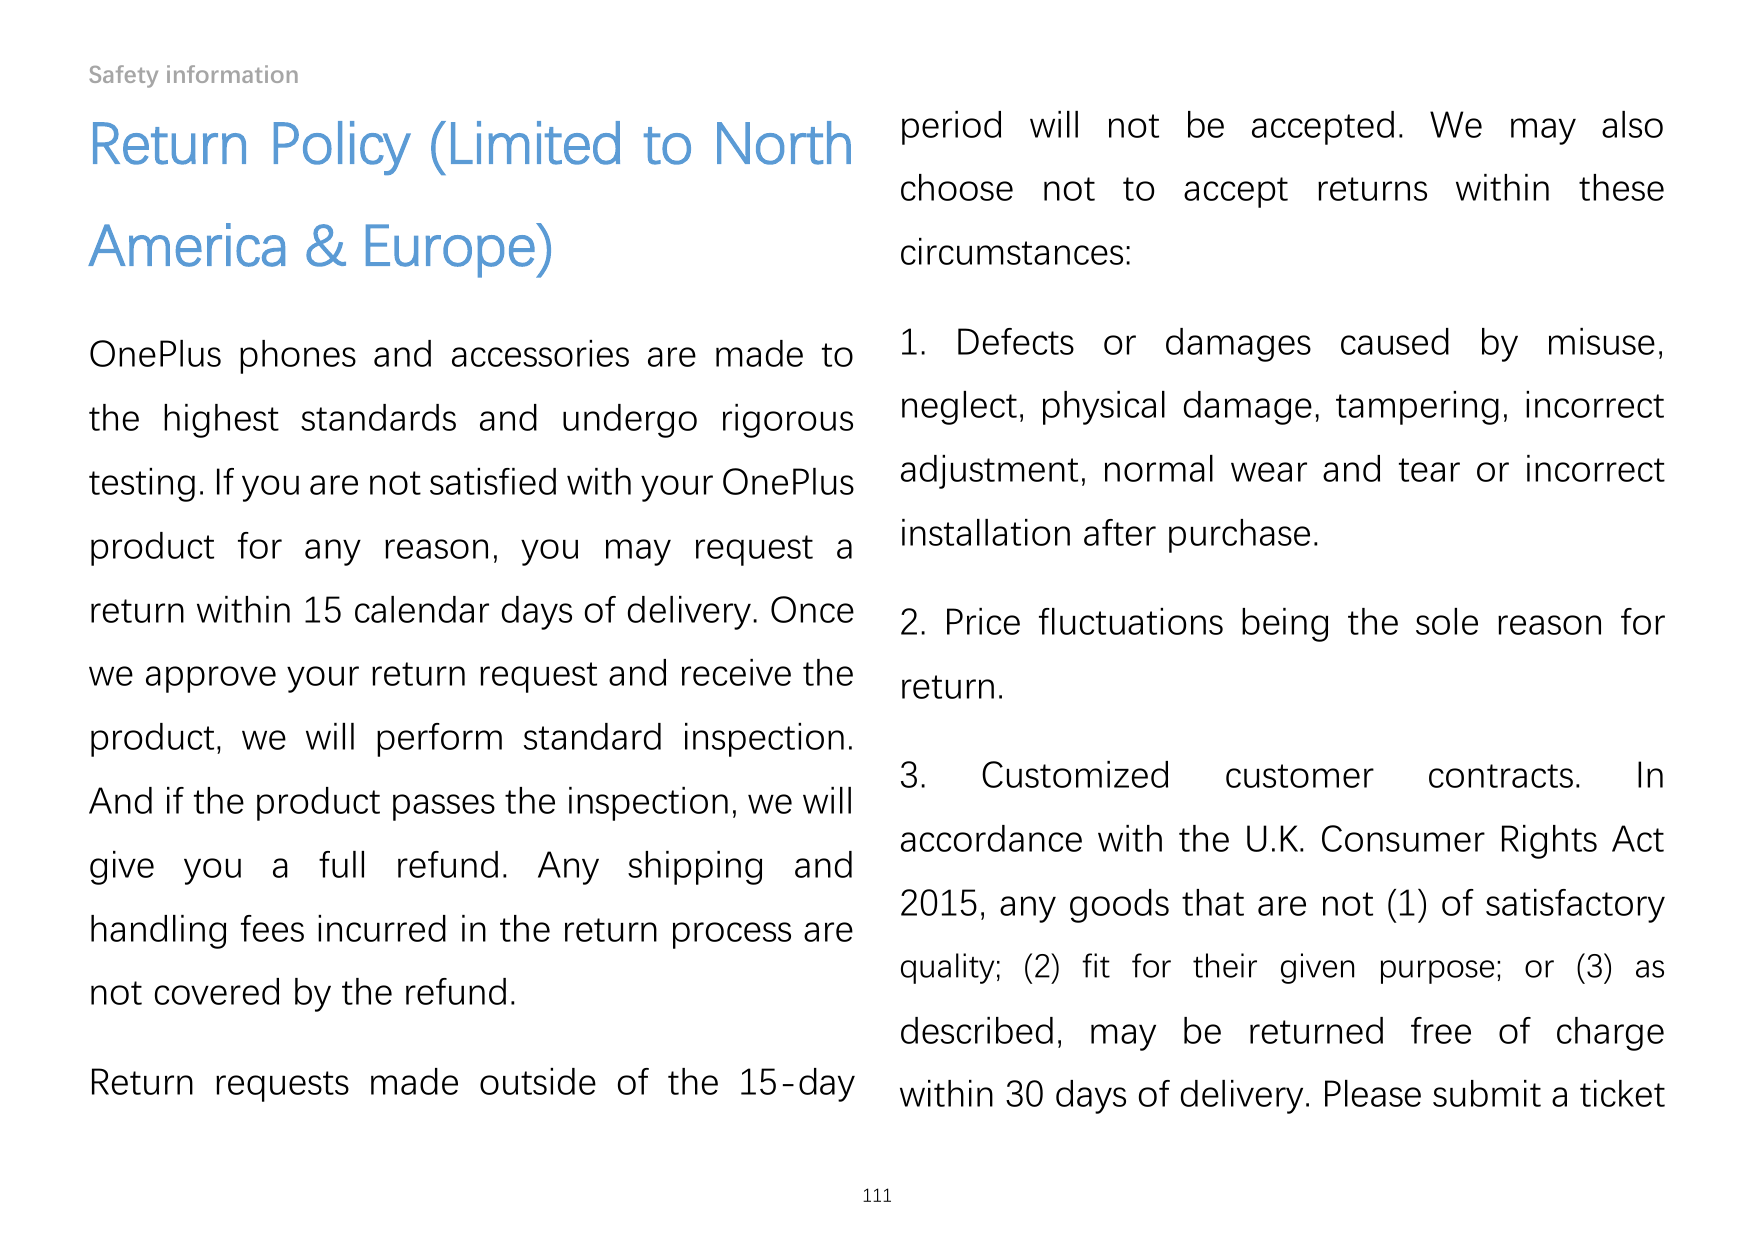 Safety informationReturn Policy (Limited to Northperiod will not be accepted. We may alsoAmerica & Europe)circumstances:OnePlus 